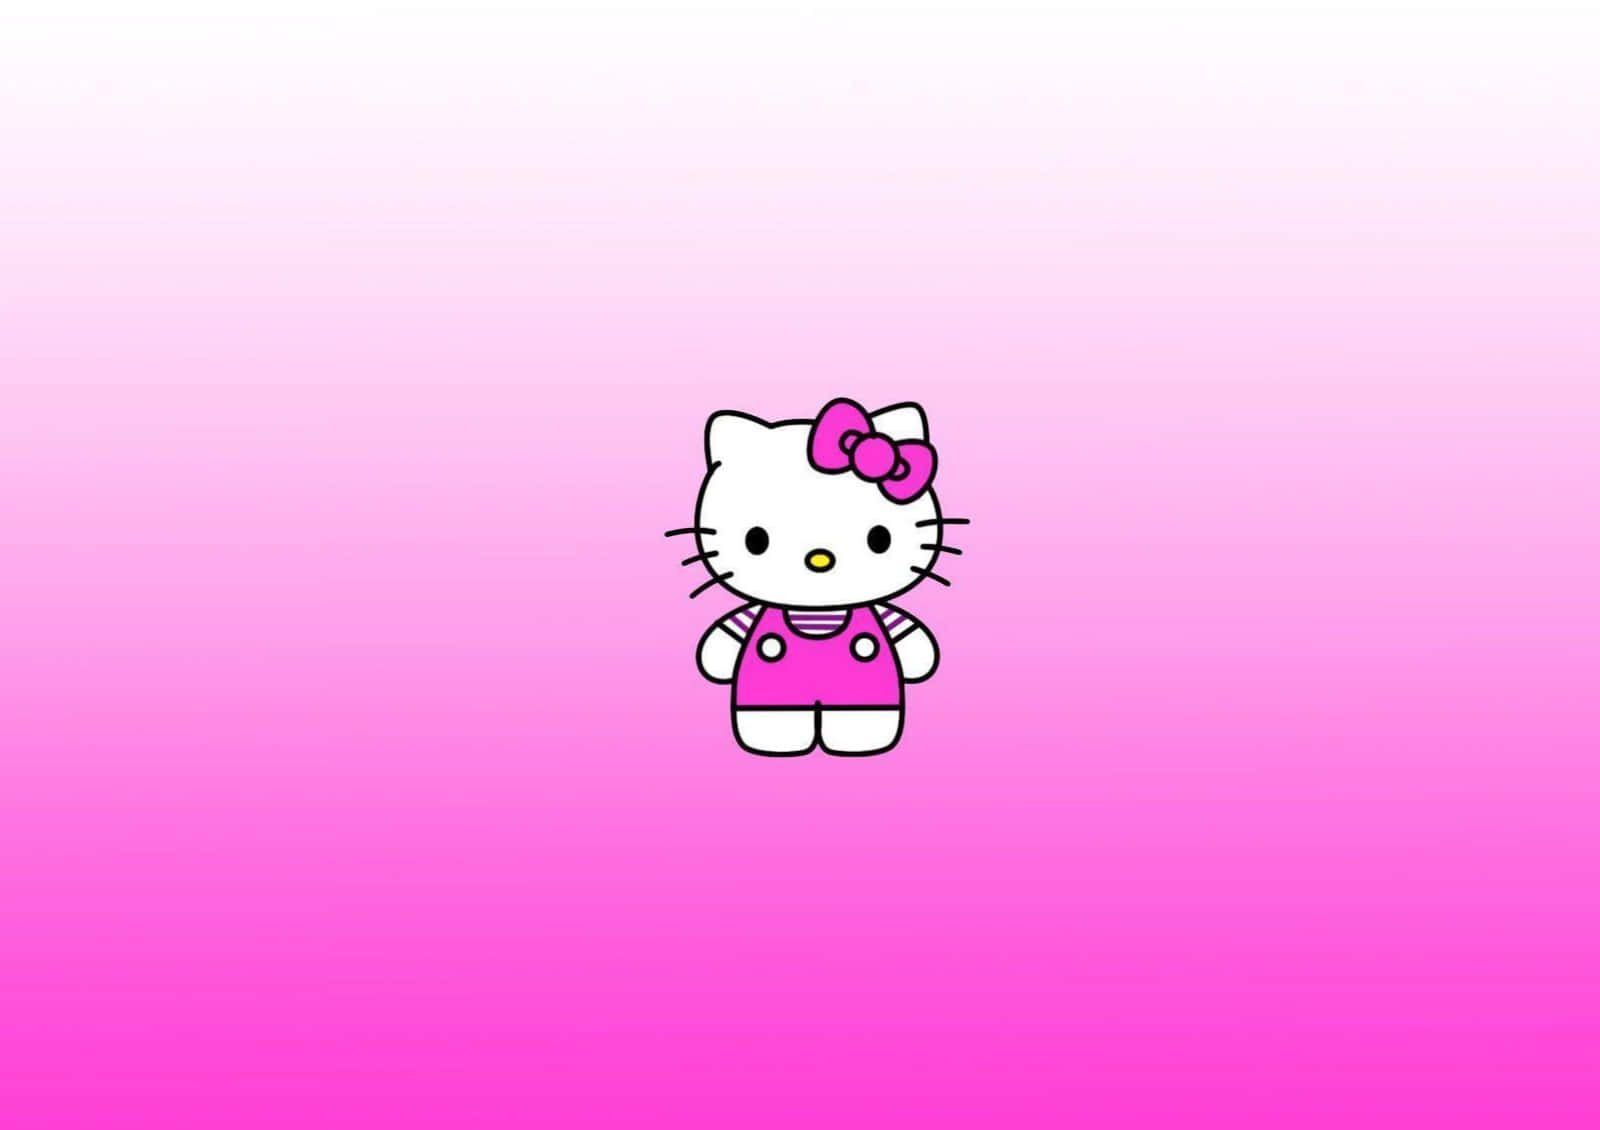 Get Supercharged With This Cute And Professional Hello Kitty Inspired Laptop Wallpaper